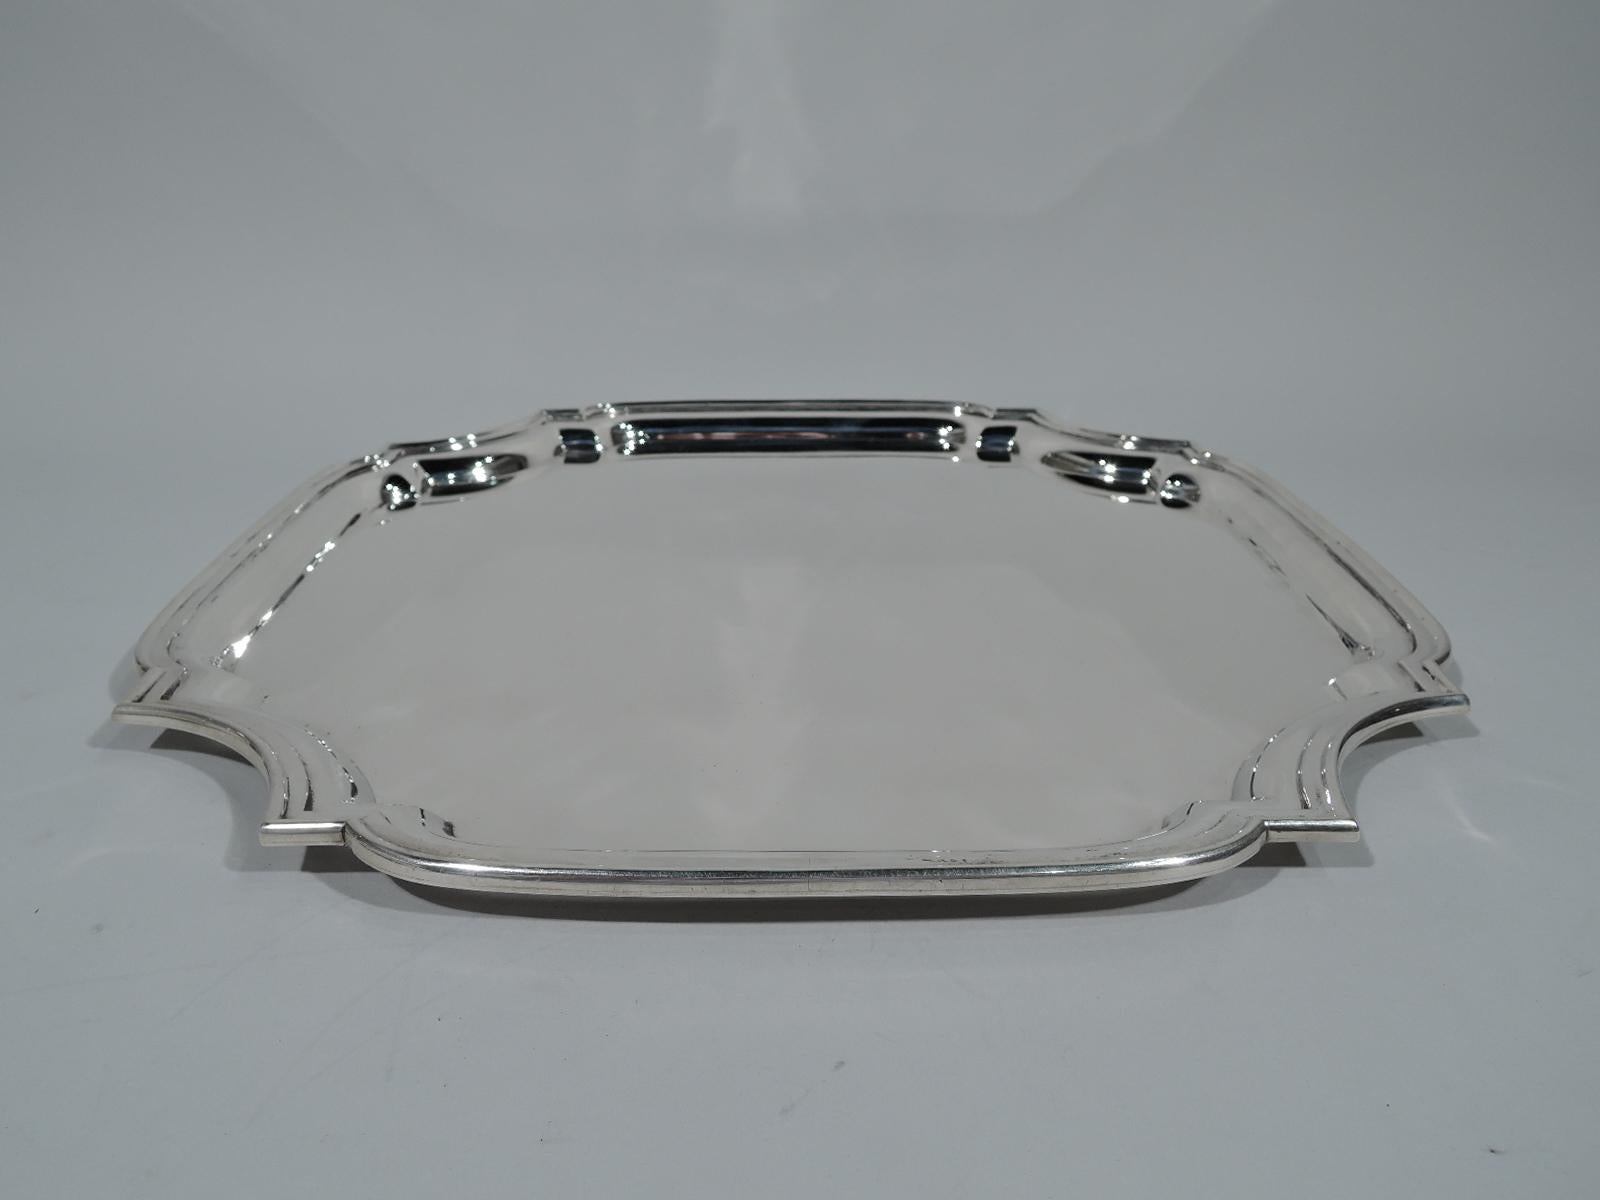 Classic Georgian-style sterling silver cartouche tray. Made by Tiffany & Co. in New York. Four sides with concave corners and molded rim. Hallmark includes postwar pattern no. 25146. Heavy weight: 46.5 troy ounces.